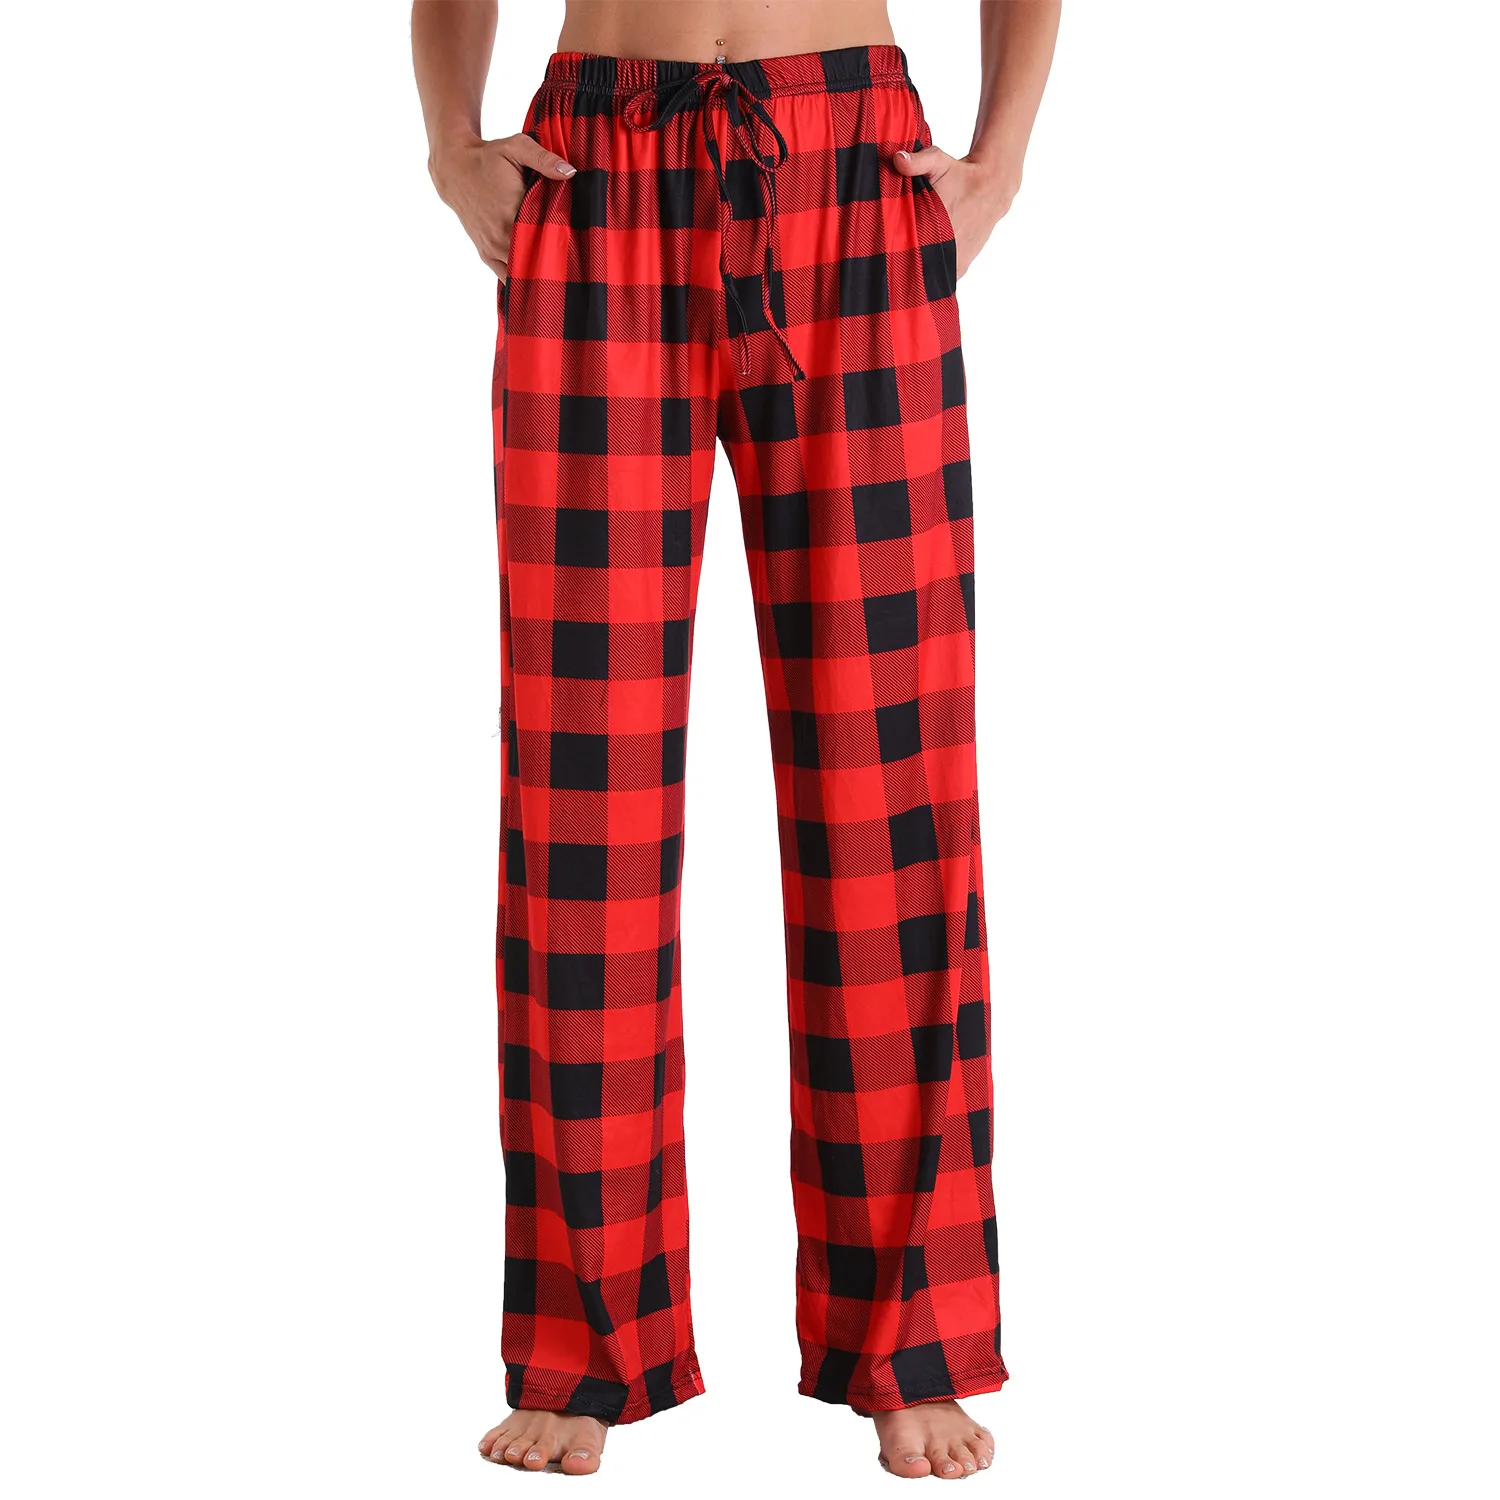 

polyester cotton black and red buffalo plaid sleeping pjs pj mens pajama bottoms, Picture shows